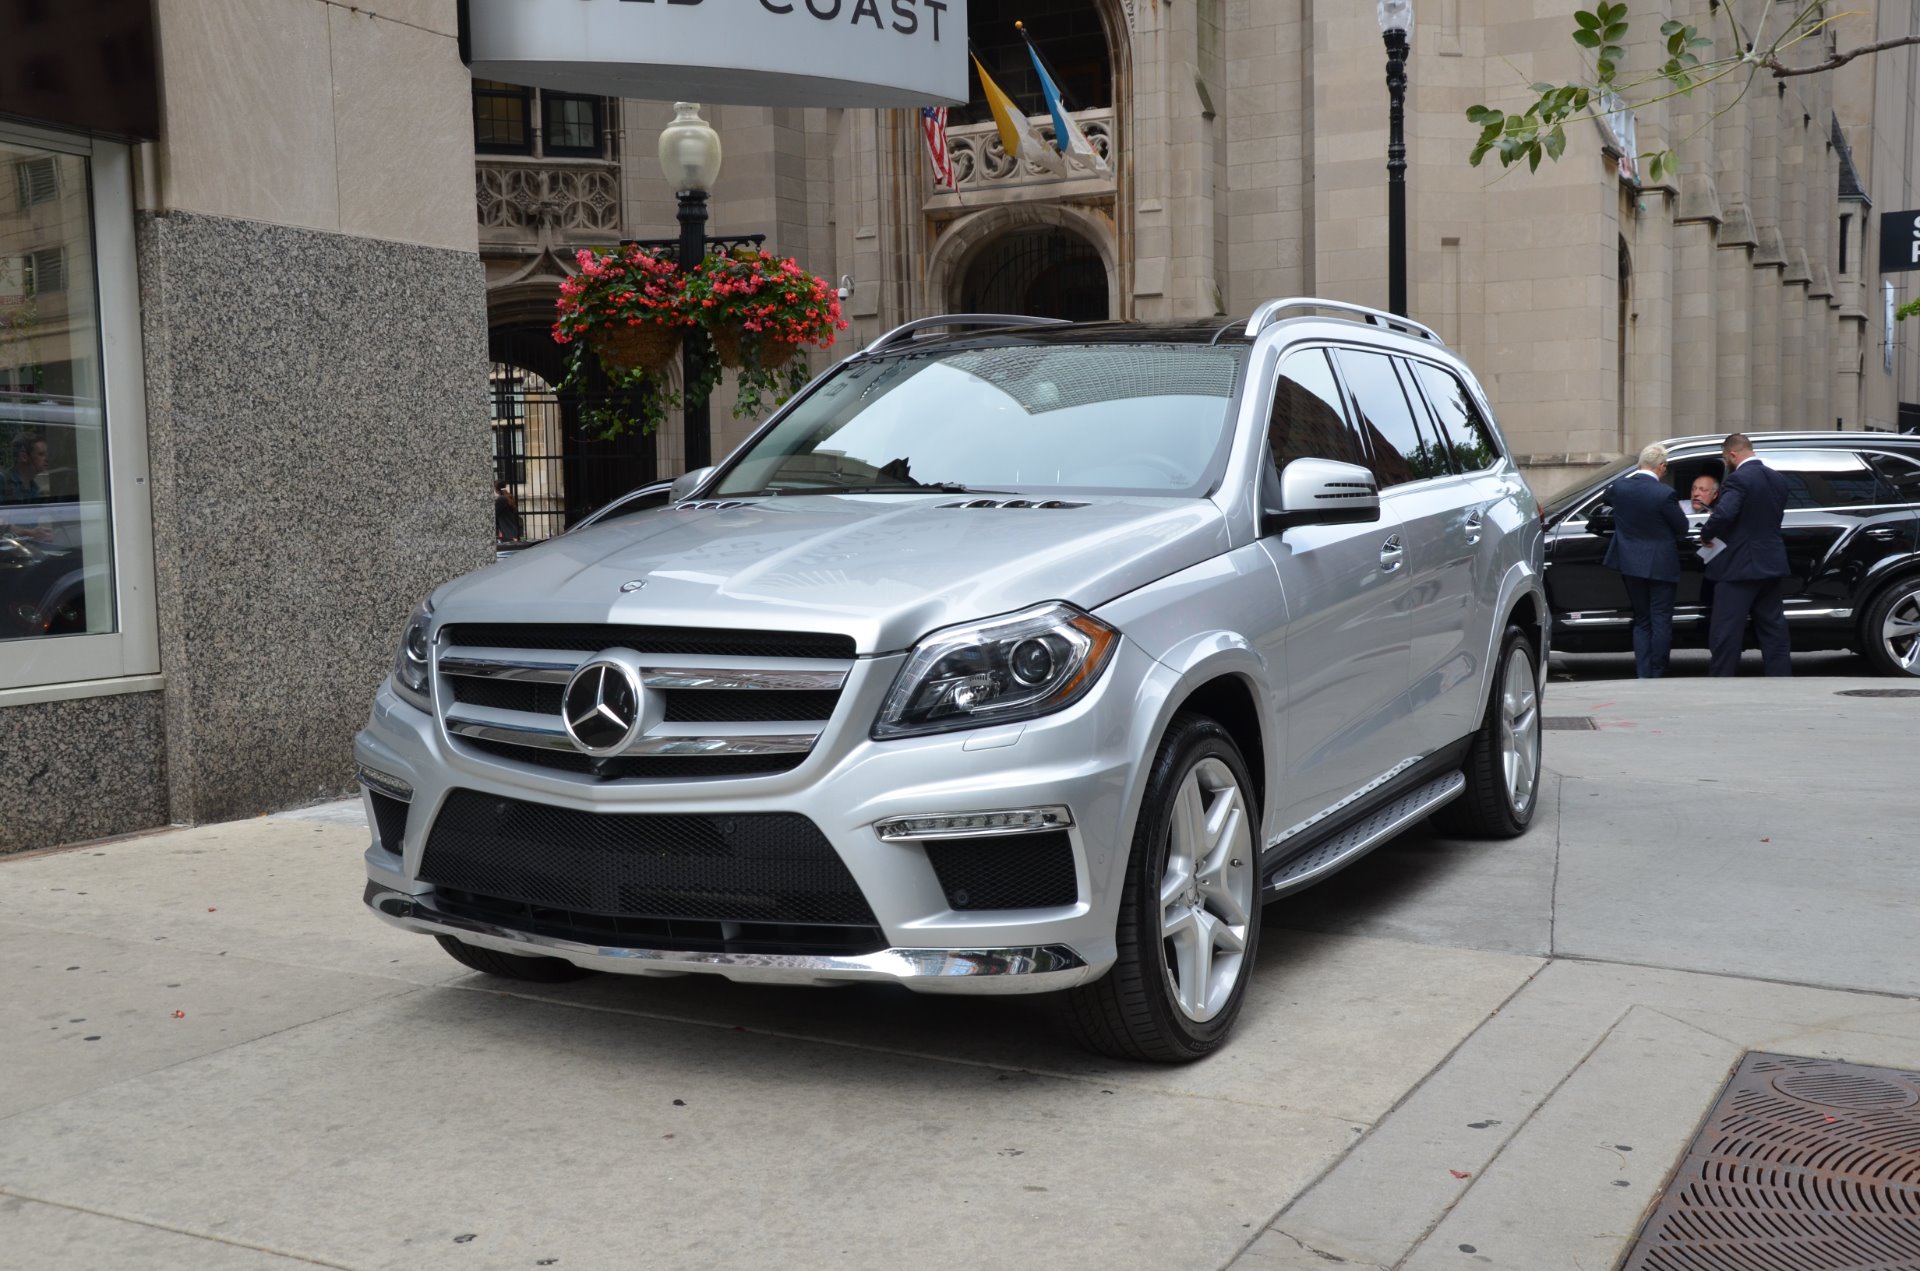 Used 2015 Mercedes-Benz GL-Class GL 550 4MATIC For Sale